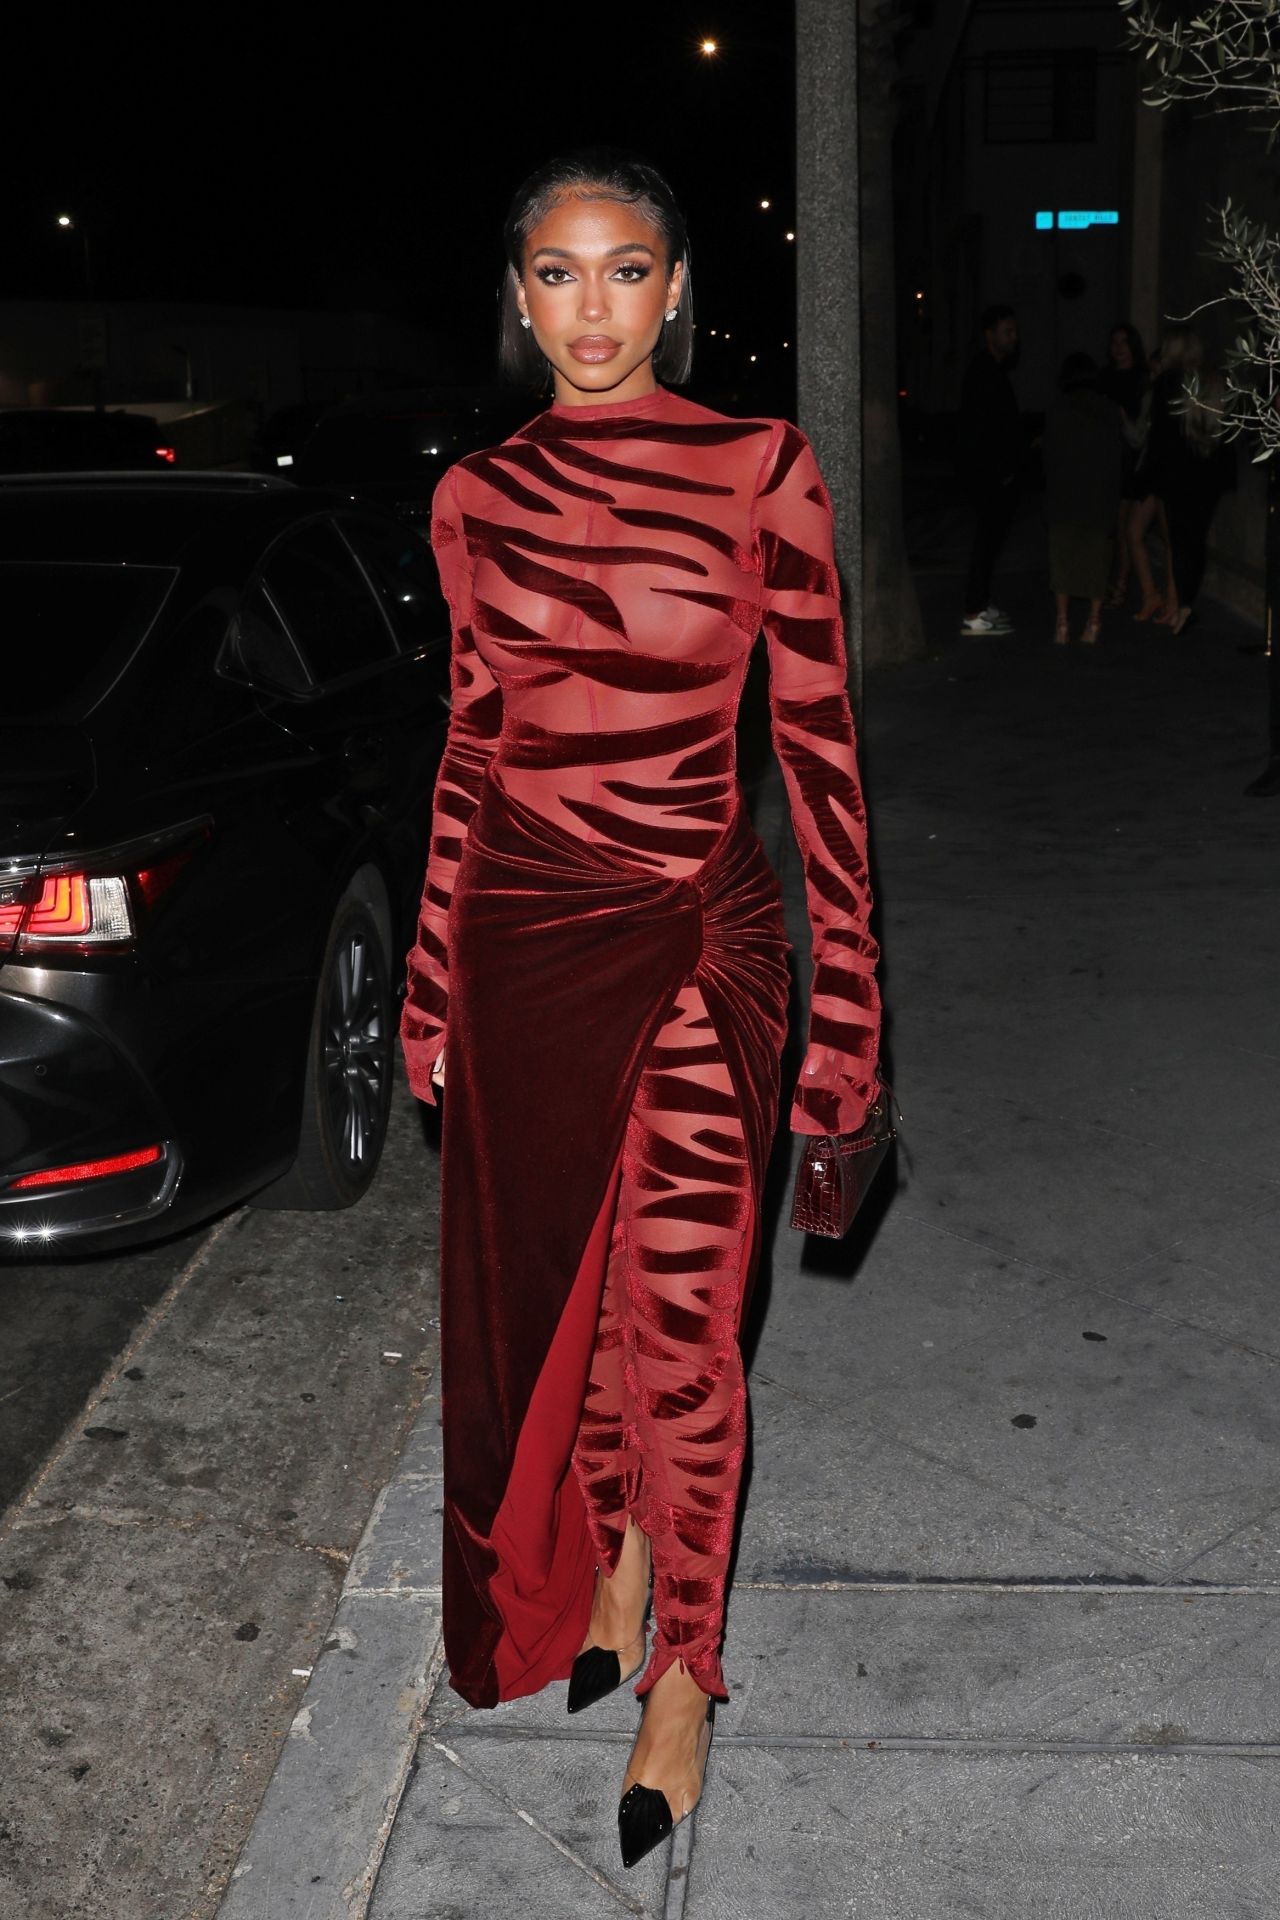 Lori Harvey Night Out Style - Wears a Red Velvet Dress at The Fleur Room in...